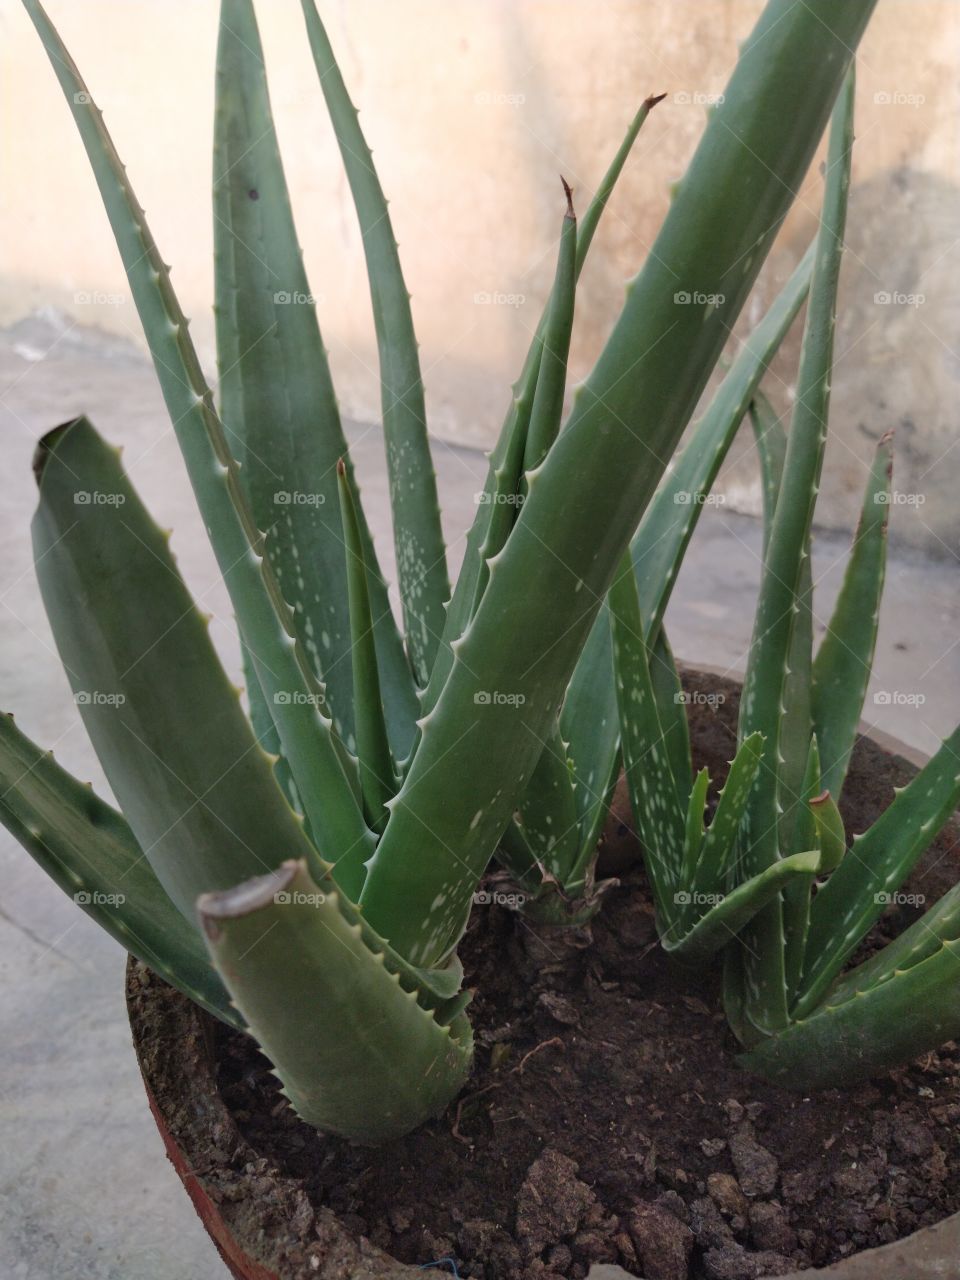 Aloe vera is a stemless or very short-stemmed plant growing to 60–100 cm (24–39 in) tall, spreading by offsets. The leaves are thick and fleshy, green to grey-green, with some varieties showing white flecks on their upper and lower stem surfaces.